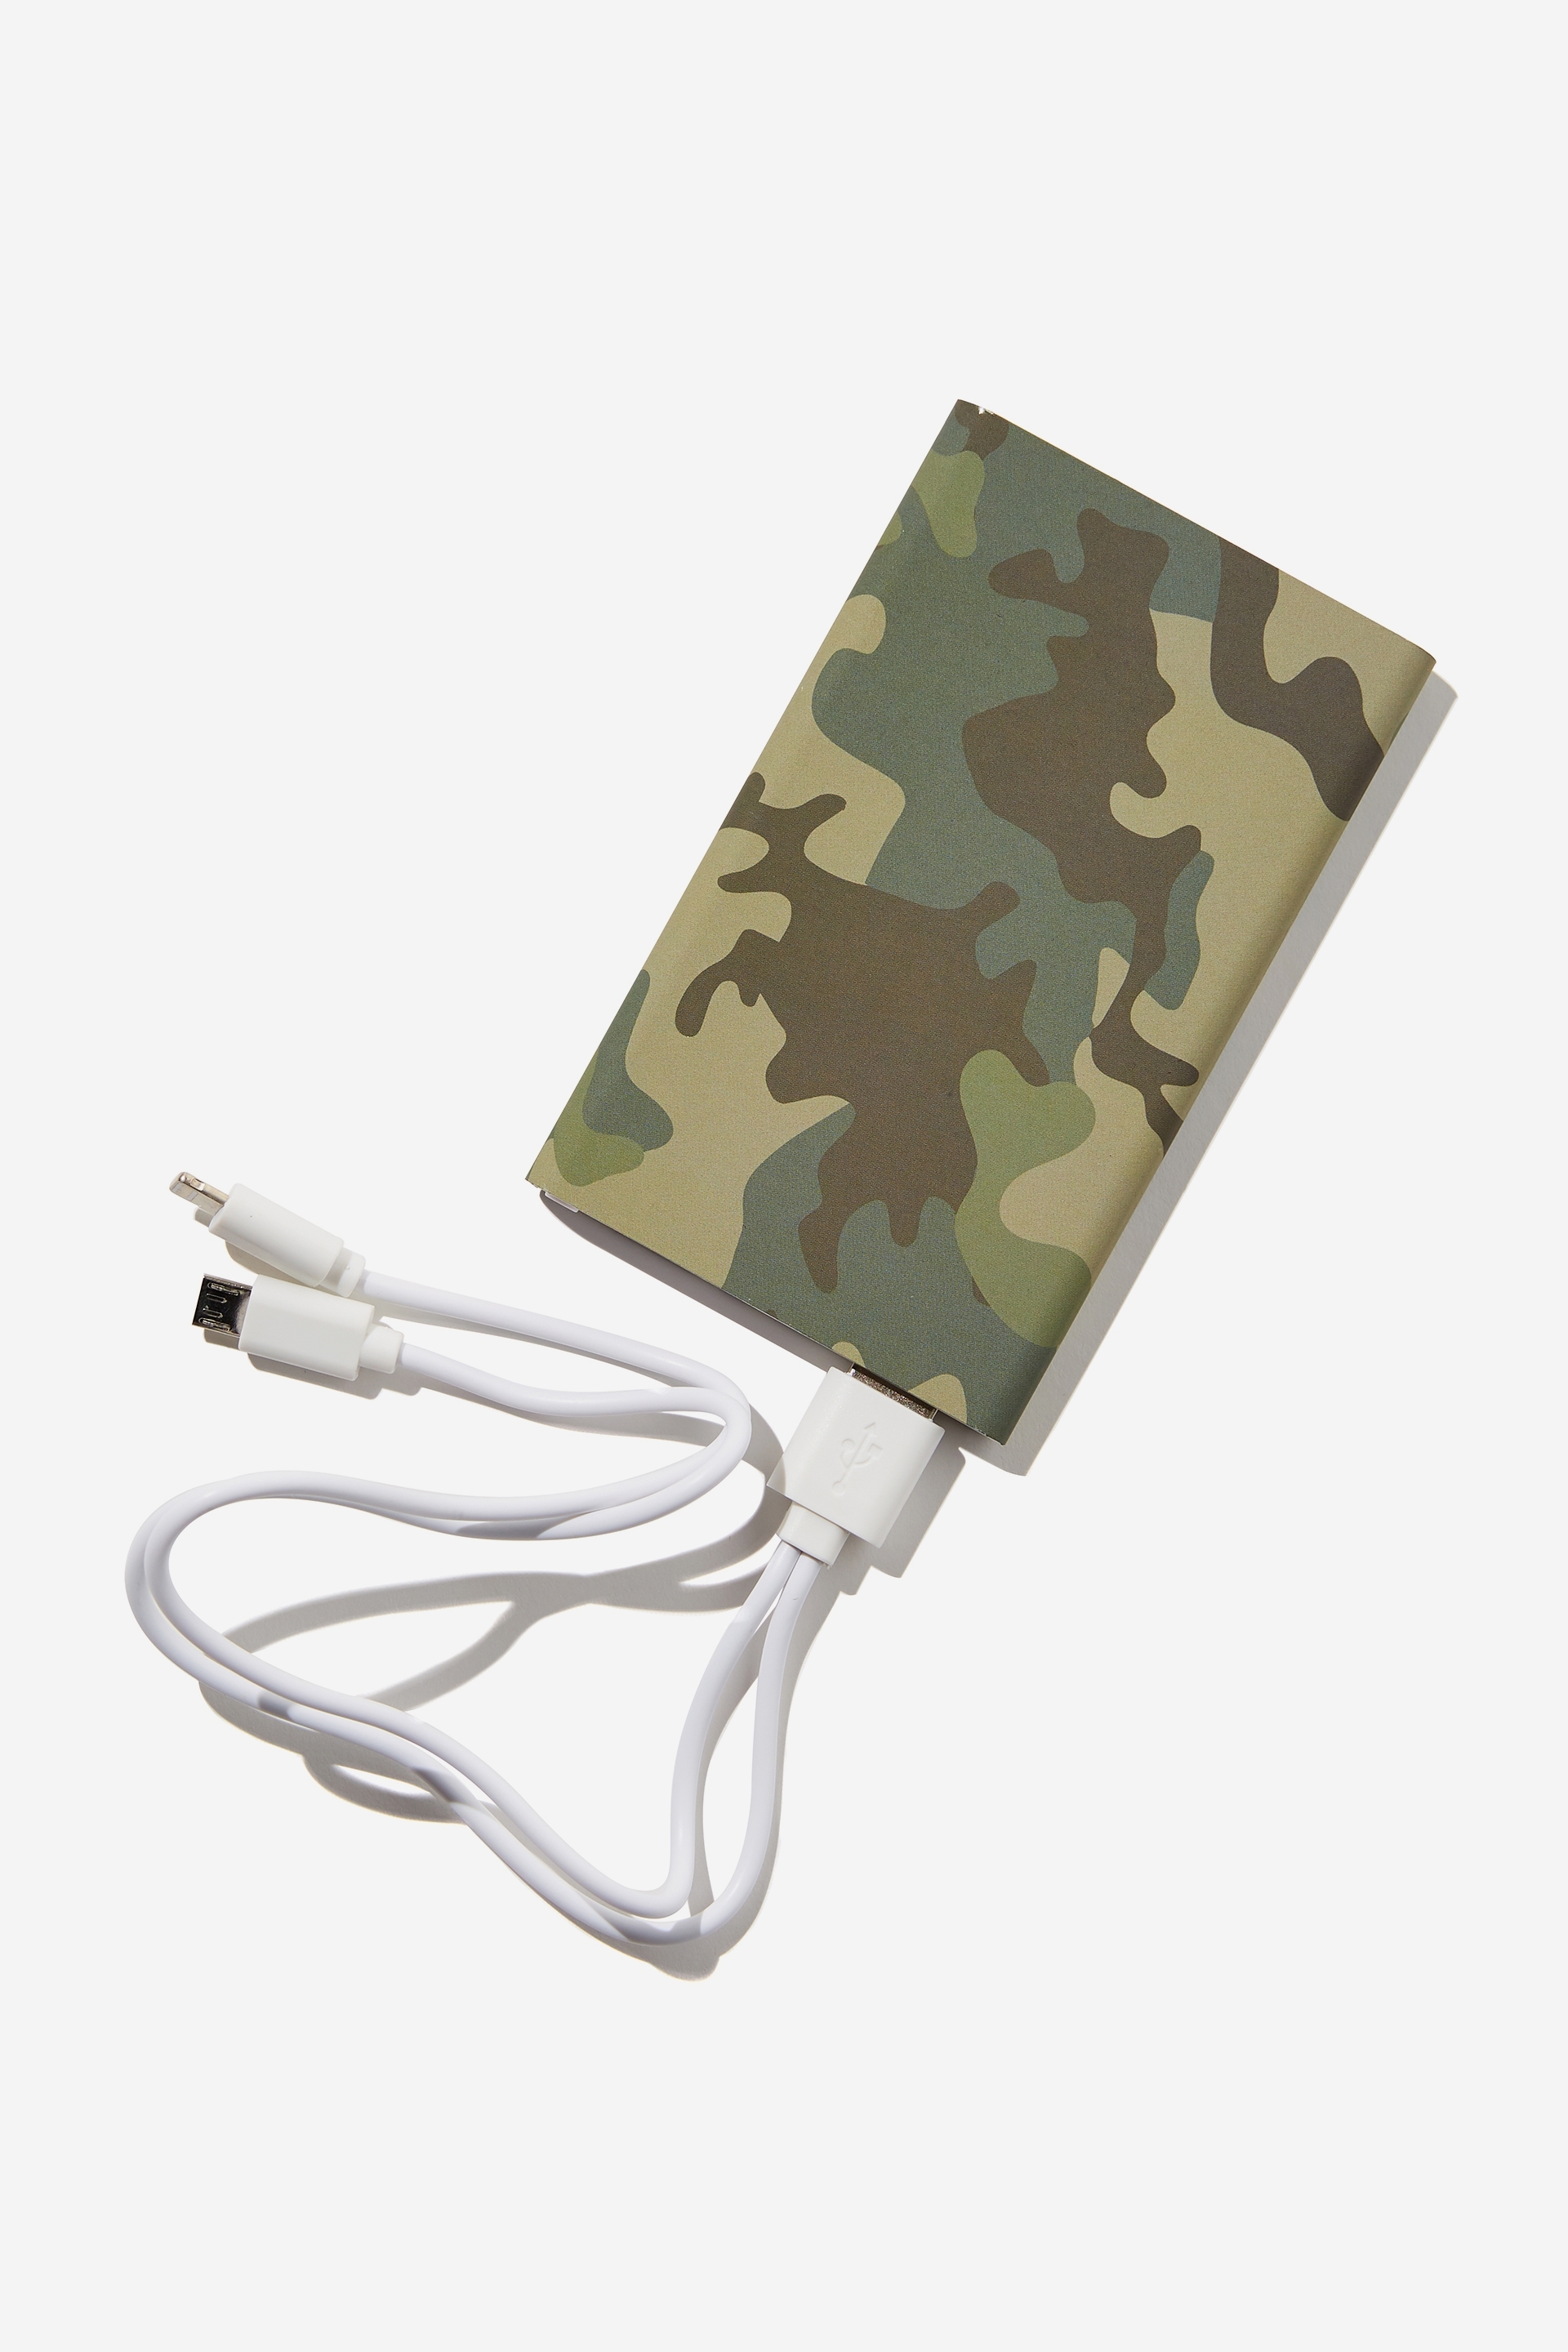 Typo - Printed Charge It Charger - Camo